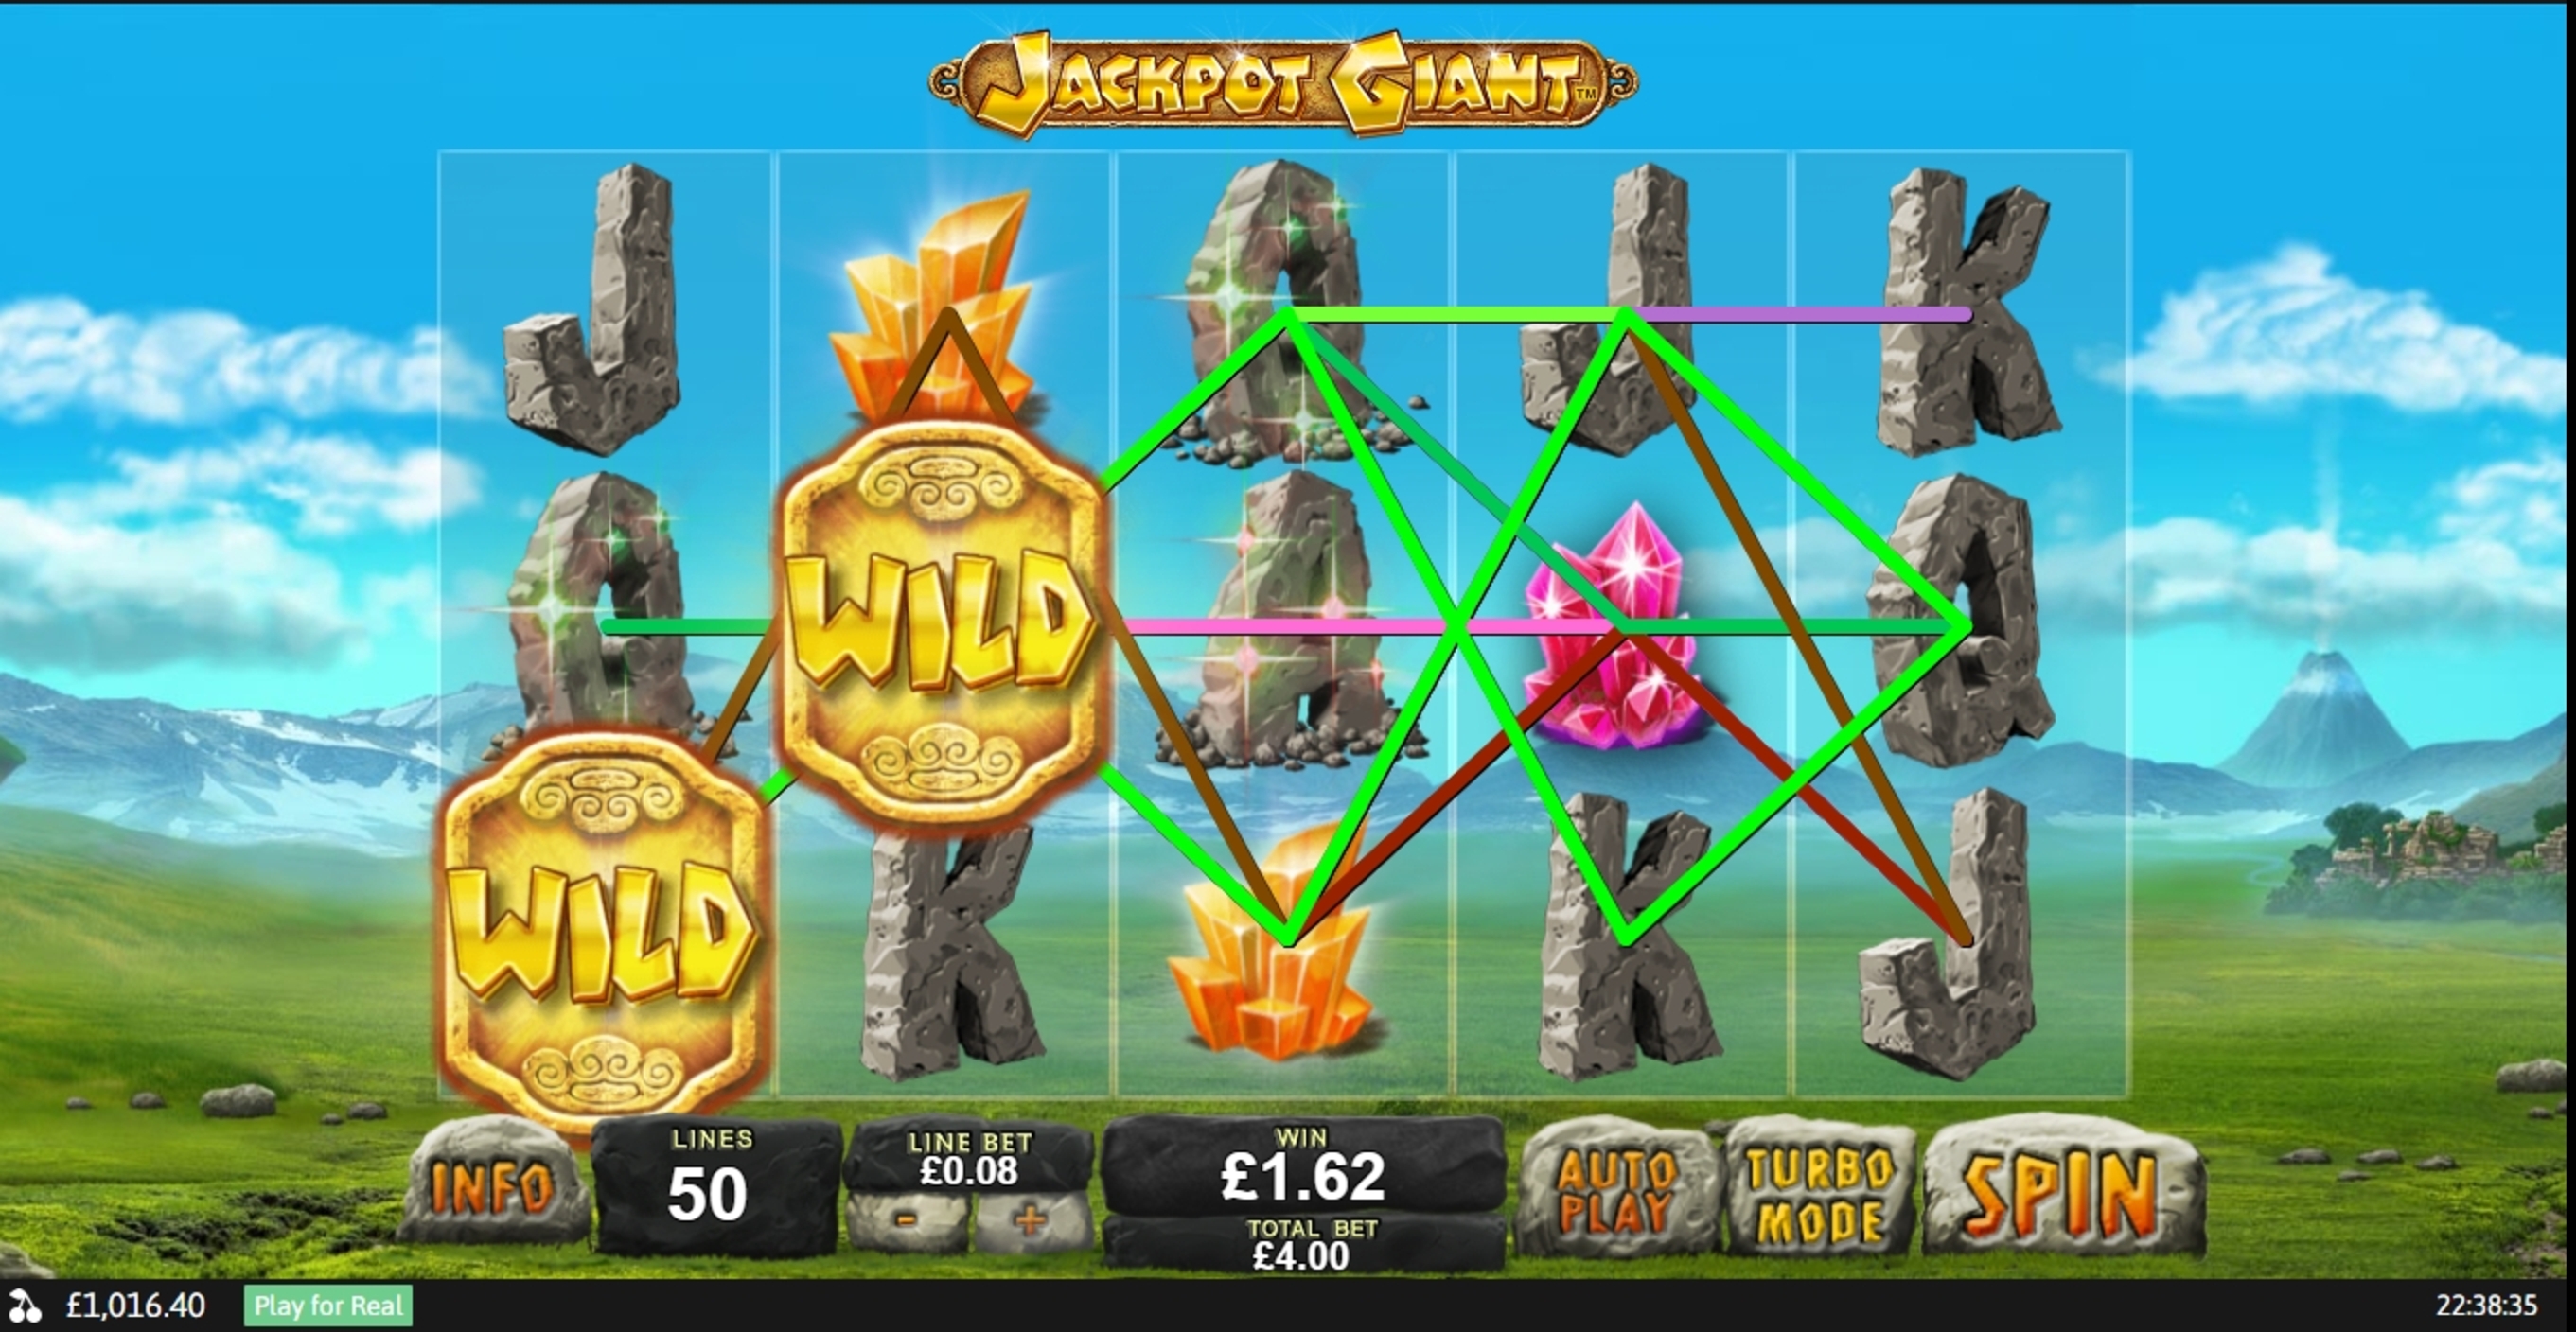 Win Money in Jackpot Giant Free Slot Game by Playtech